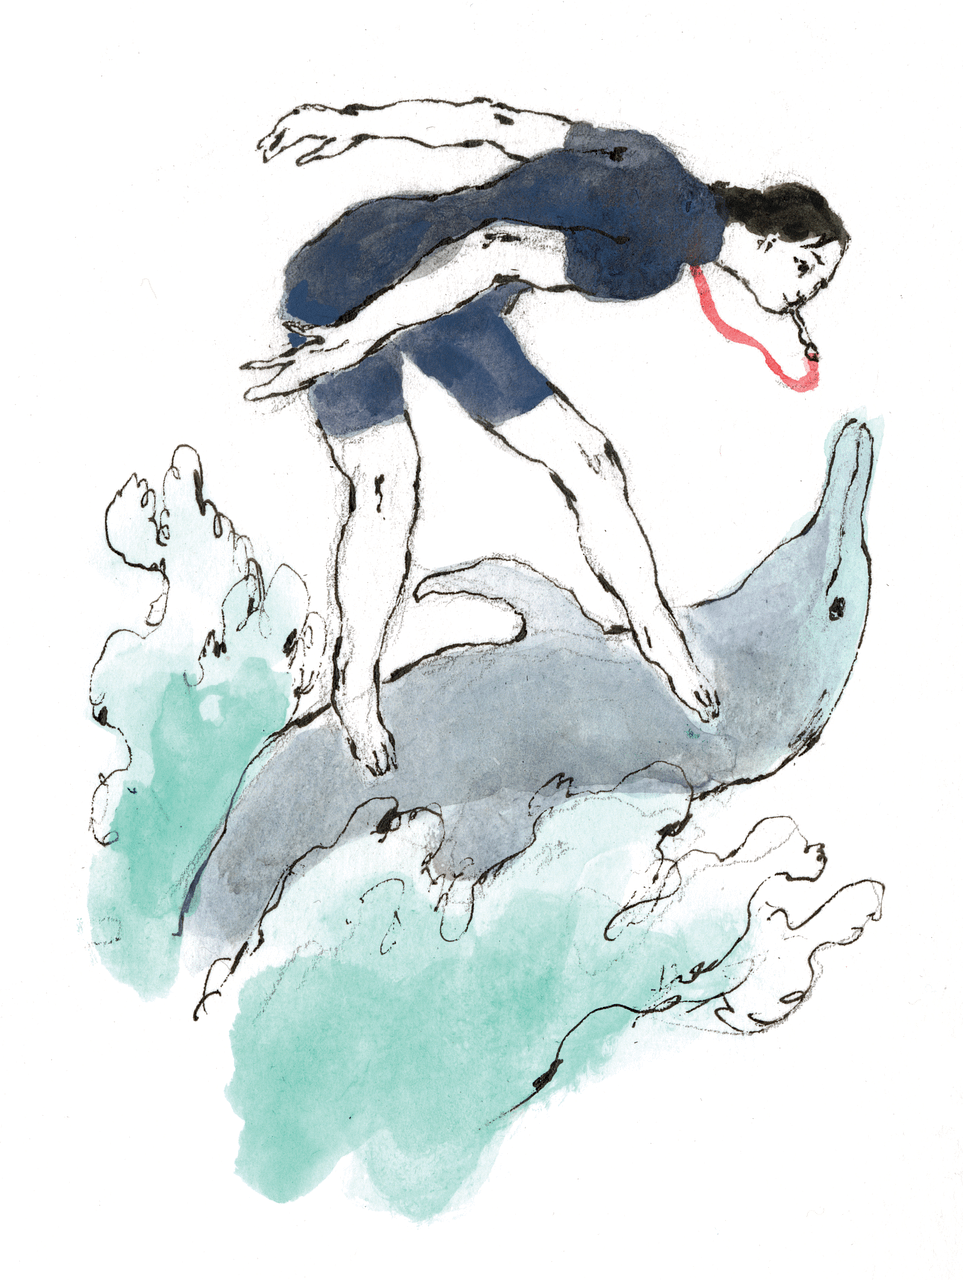 woman in a blue swimsuit blowing on a red whistle while surfing on the belly of a dolphin